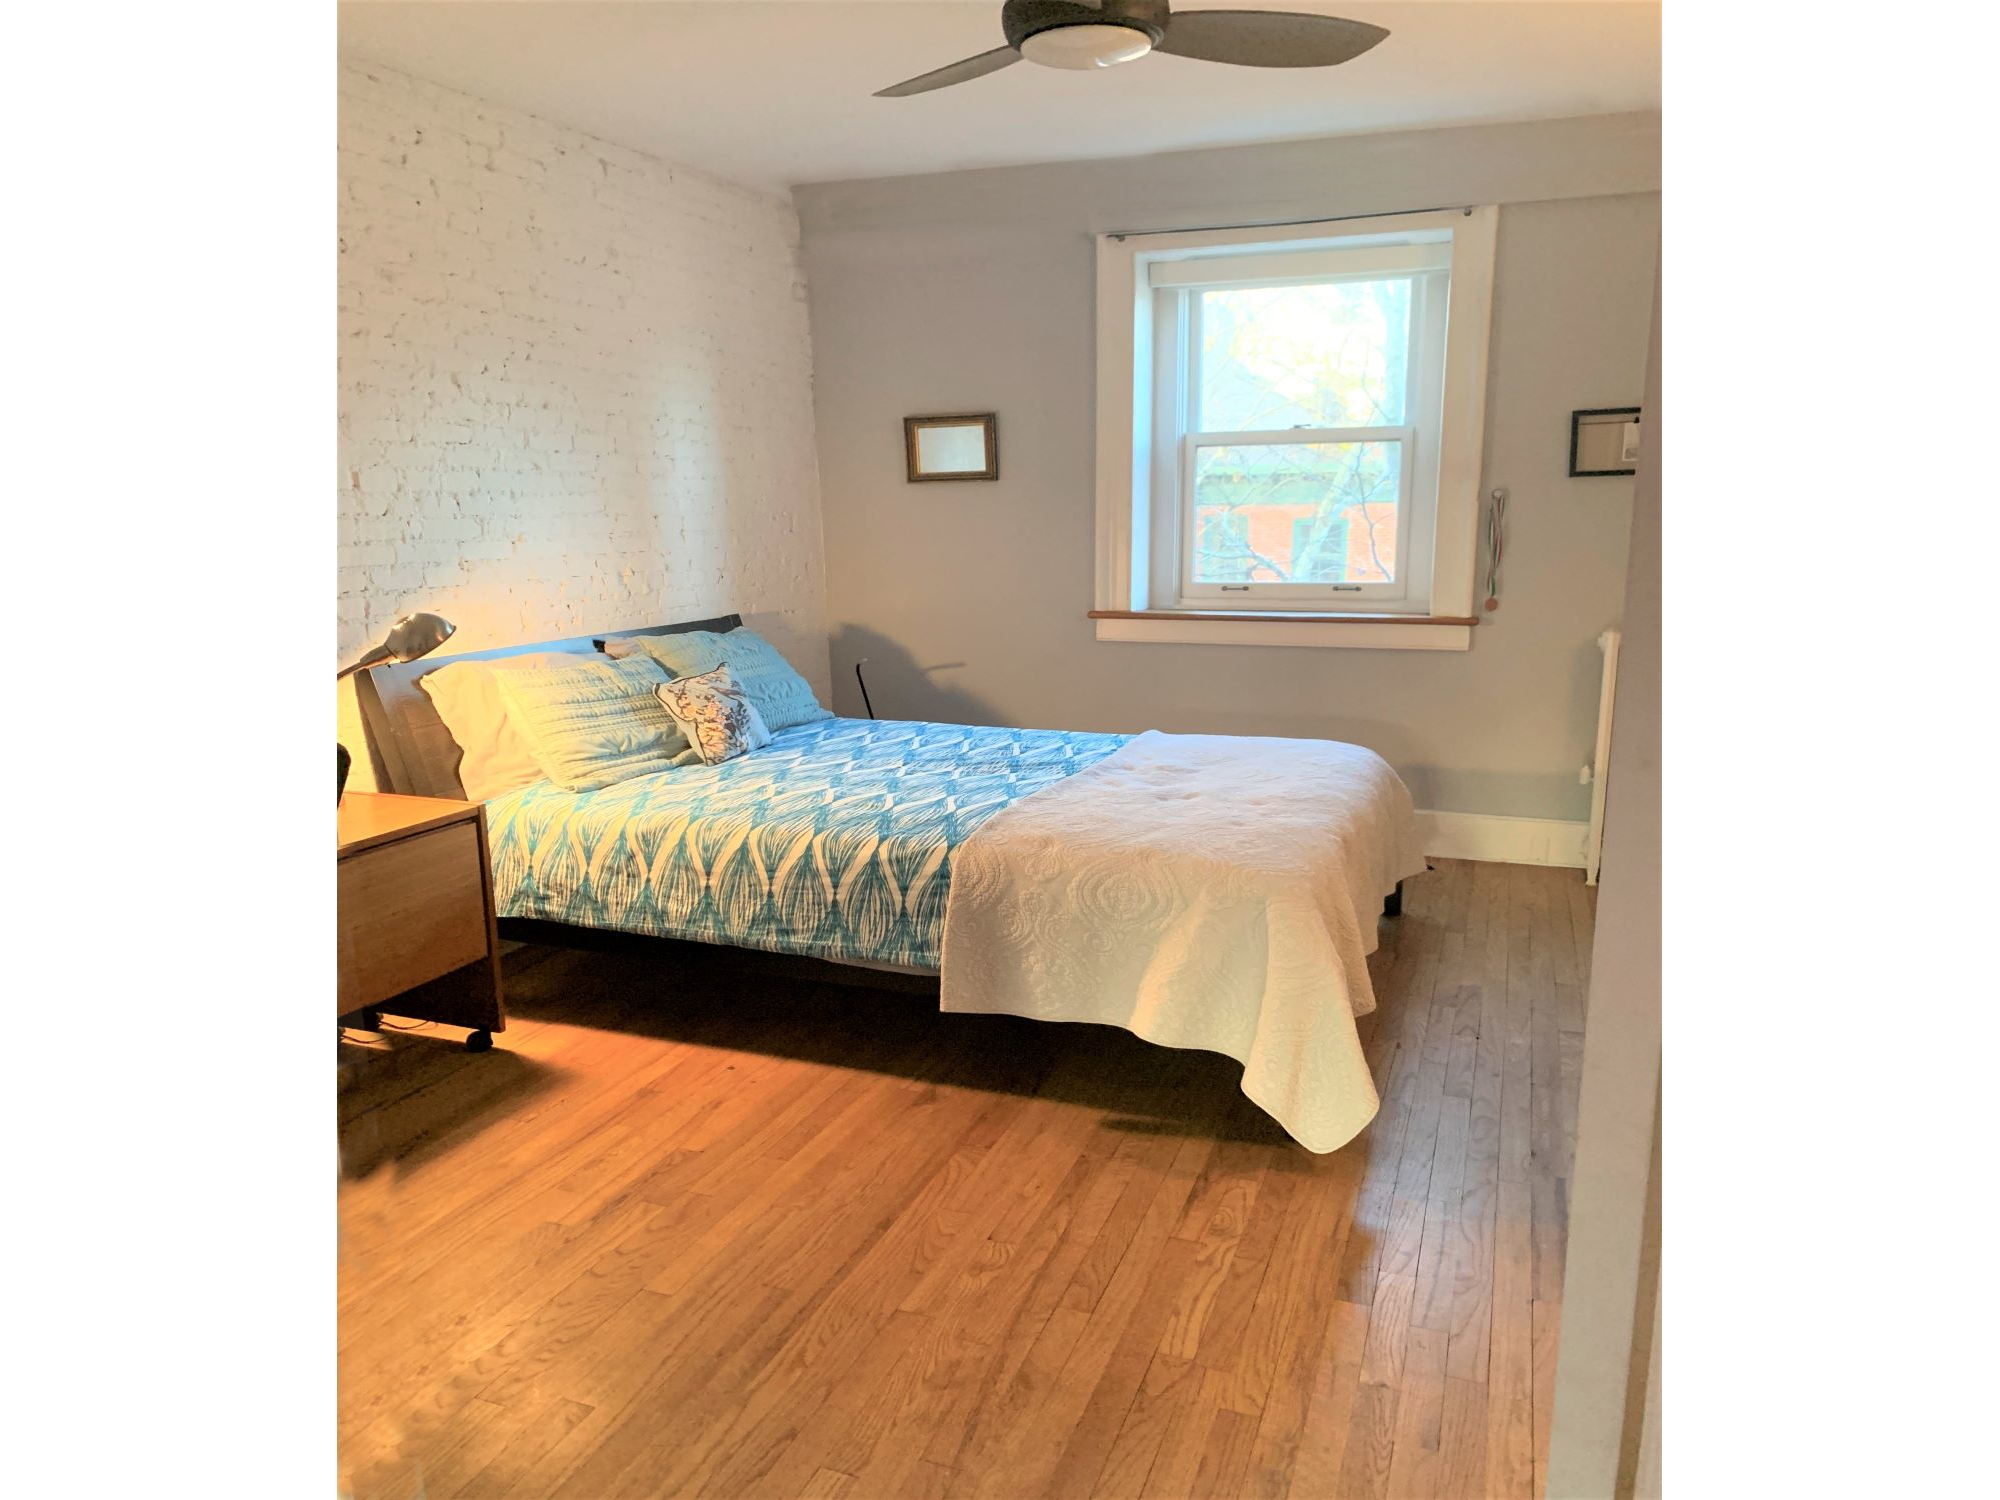 372 1/2 Pacific st, Brooklyn, NY, 3 Bedrooms Bedrooms, 10 Rooms Rooms,2 BathroomsBathrooms,Apartment,For Rent,Pacific st,1248